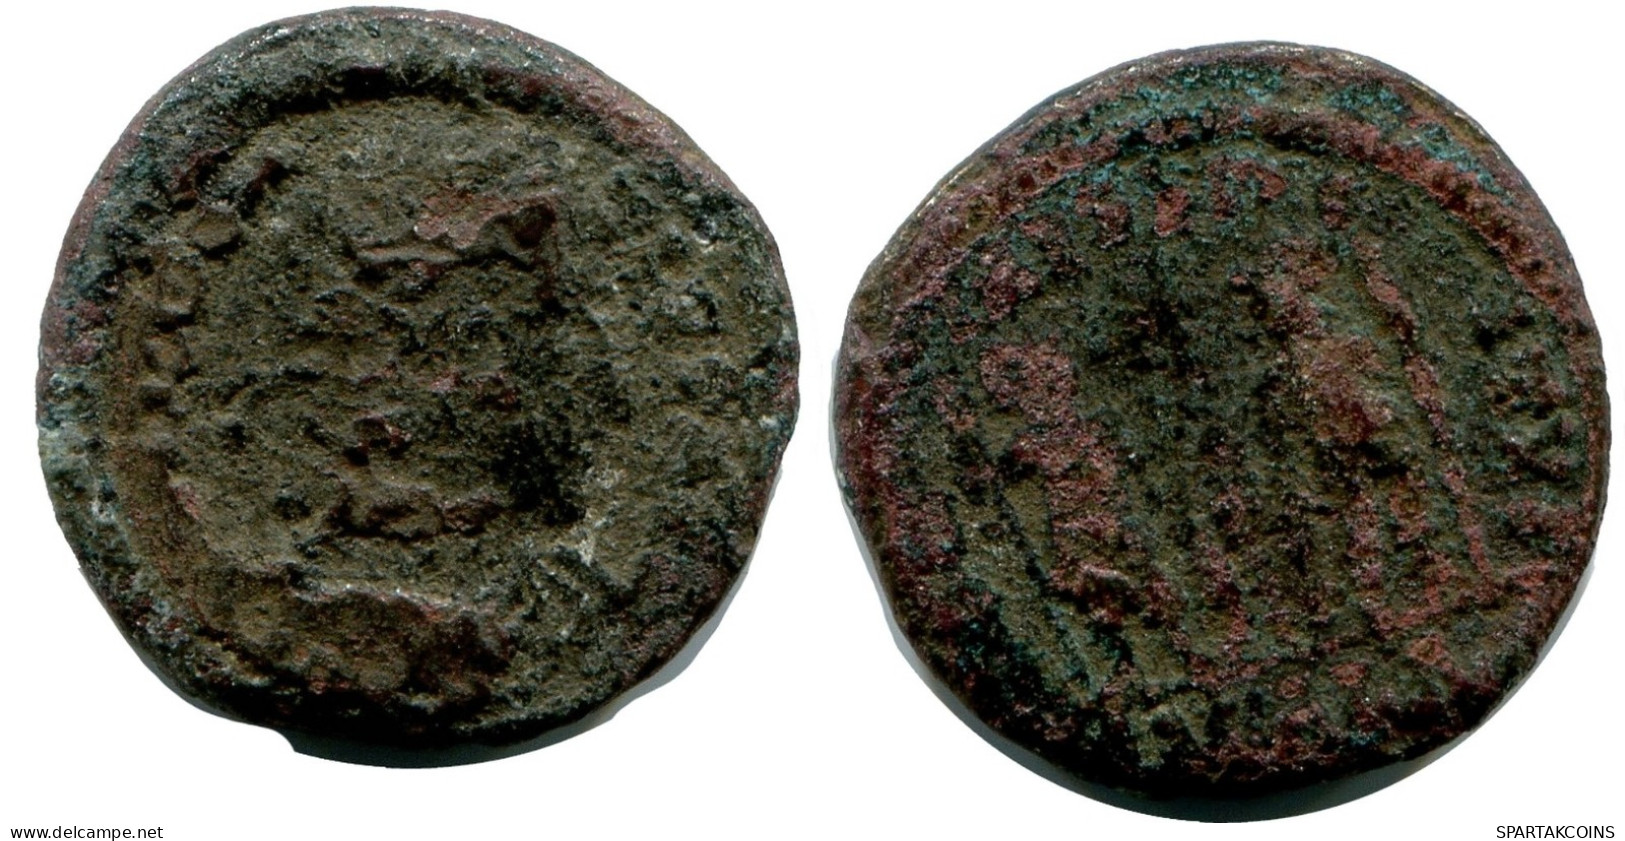 ROMAN Pièce MINTED IN ALEKSANDRIA FROM THE ROYAL ONTARIO MUSEUM #ANC10184.14.F.A - The Christian Empire (307 AD To 363 AD)